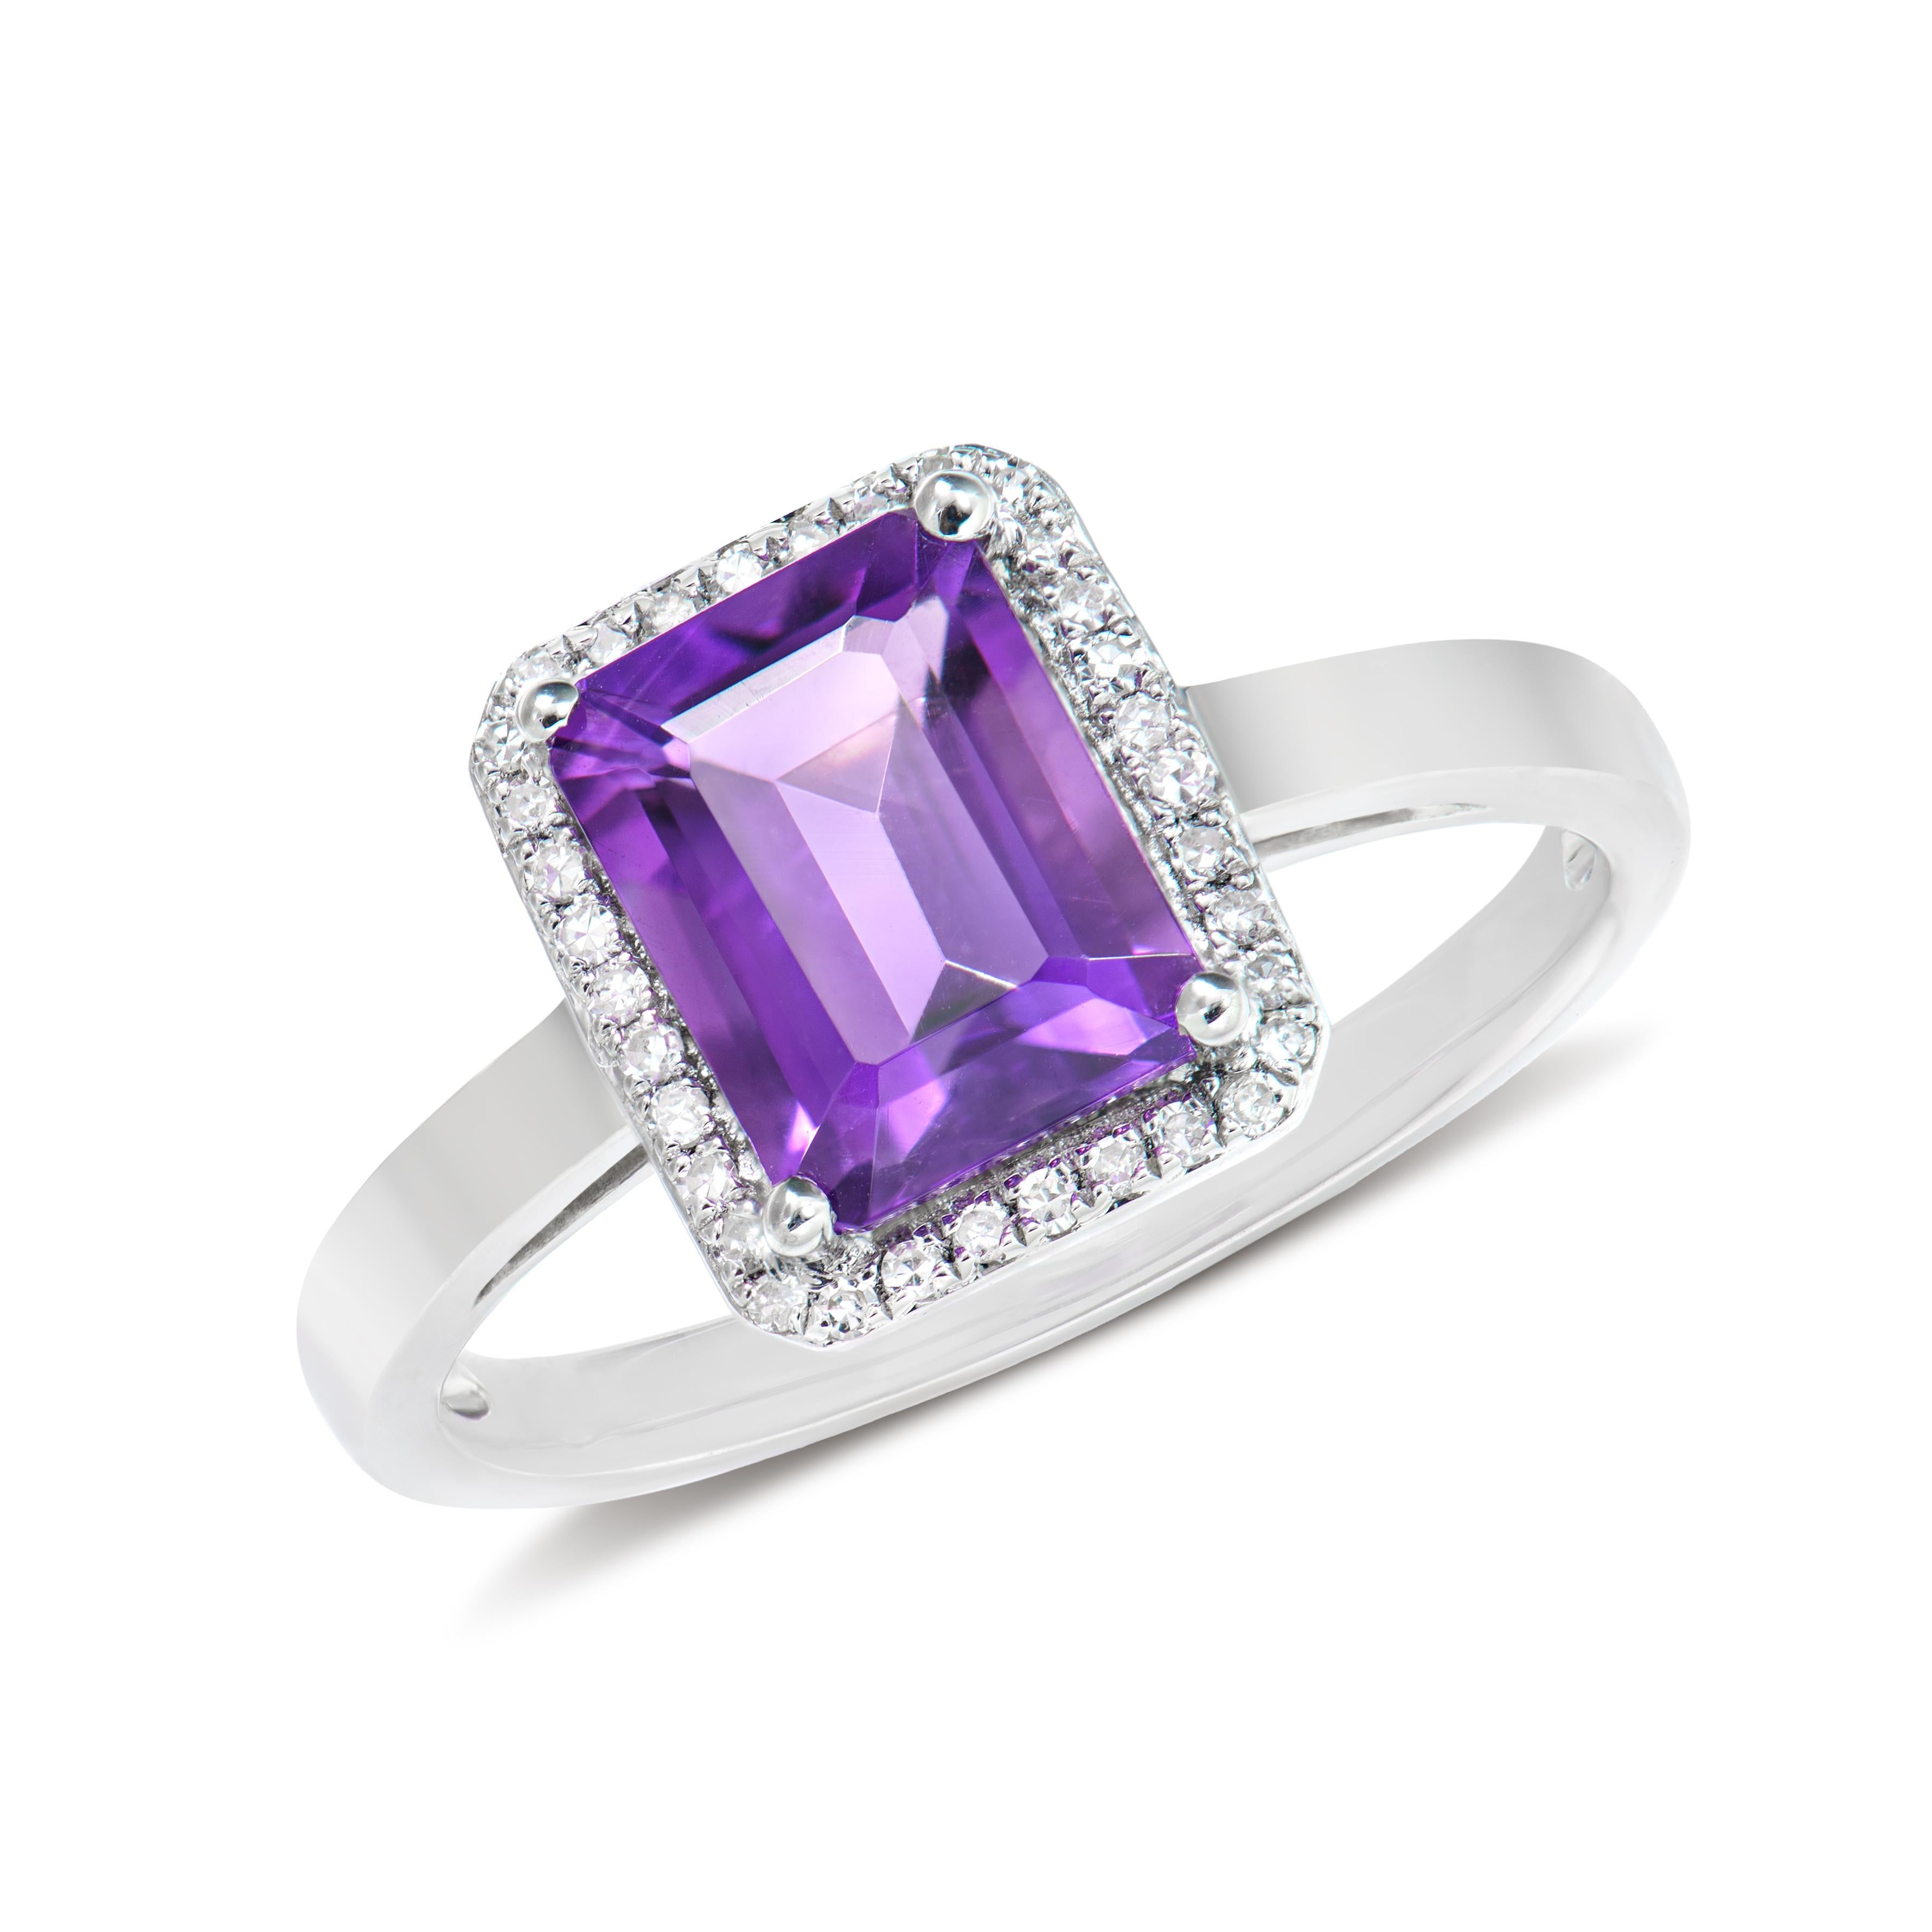 Octagon Cut 1.40 Carat Amethyst Fancy Ring in 18Karat White Gold with White Diamond.   For Sale